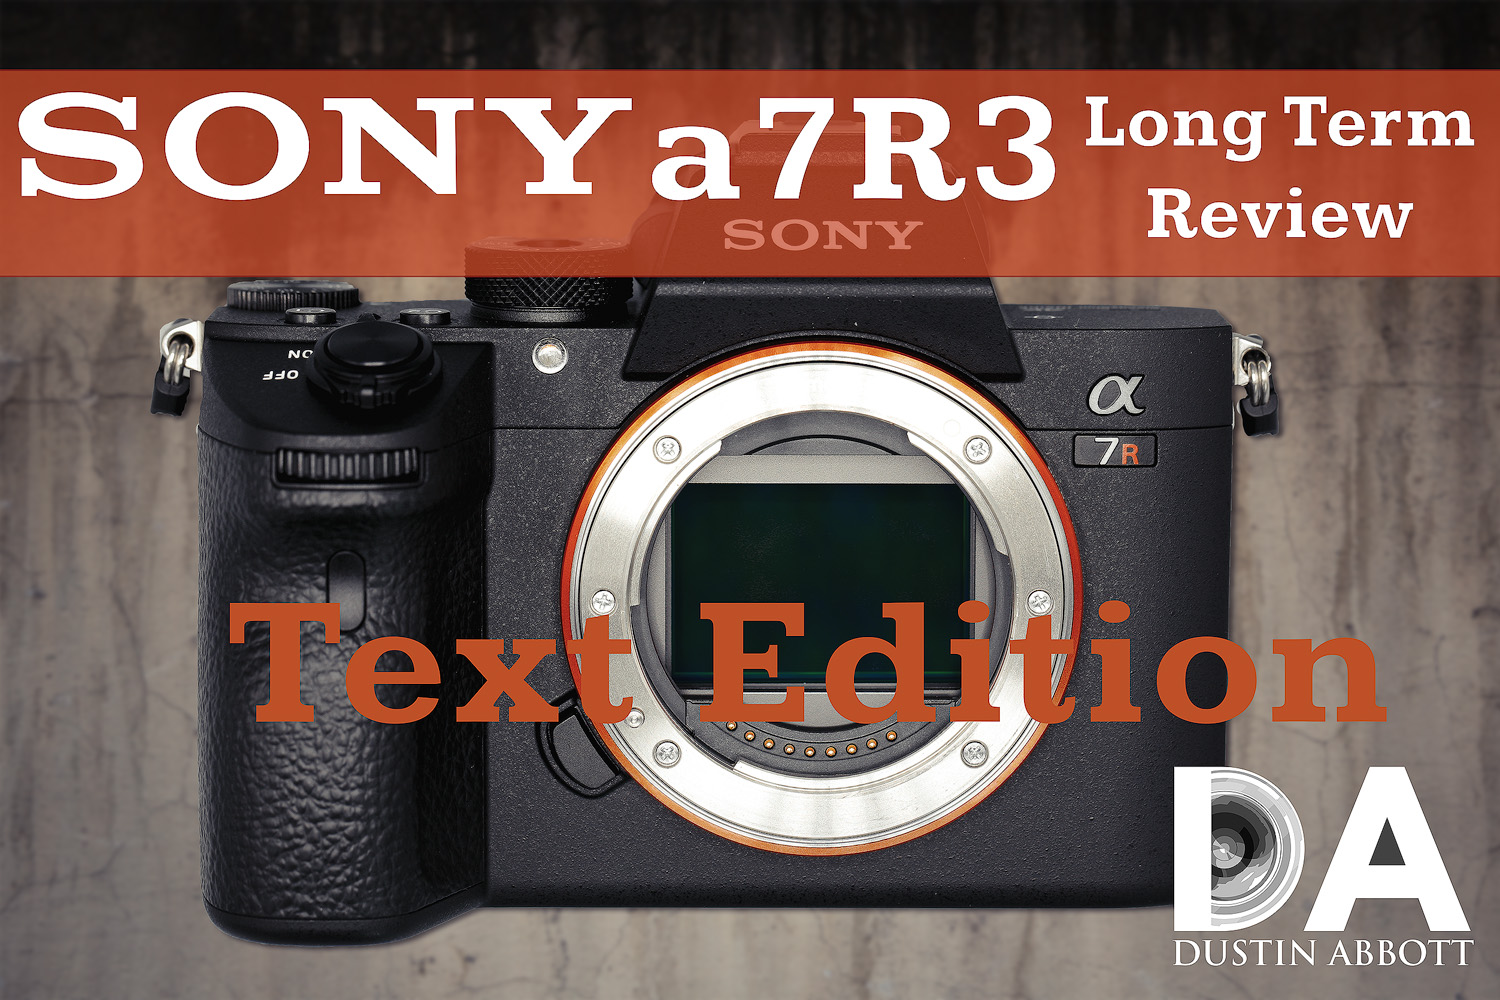 Sony a7R IIIA Mirrorless Camera with 16-35mm f/2.8 Lens Kit B&H